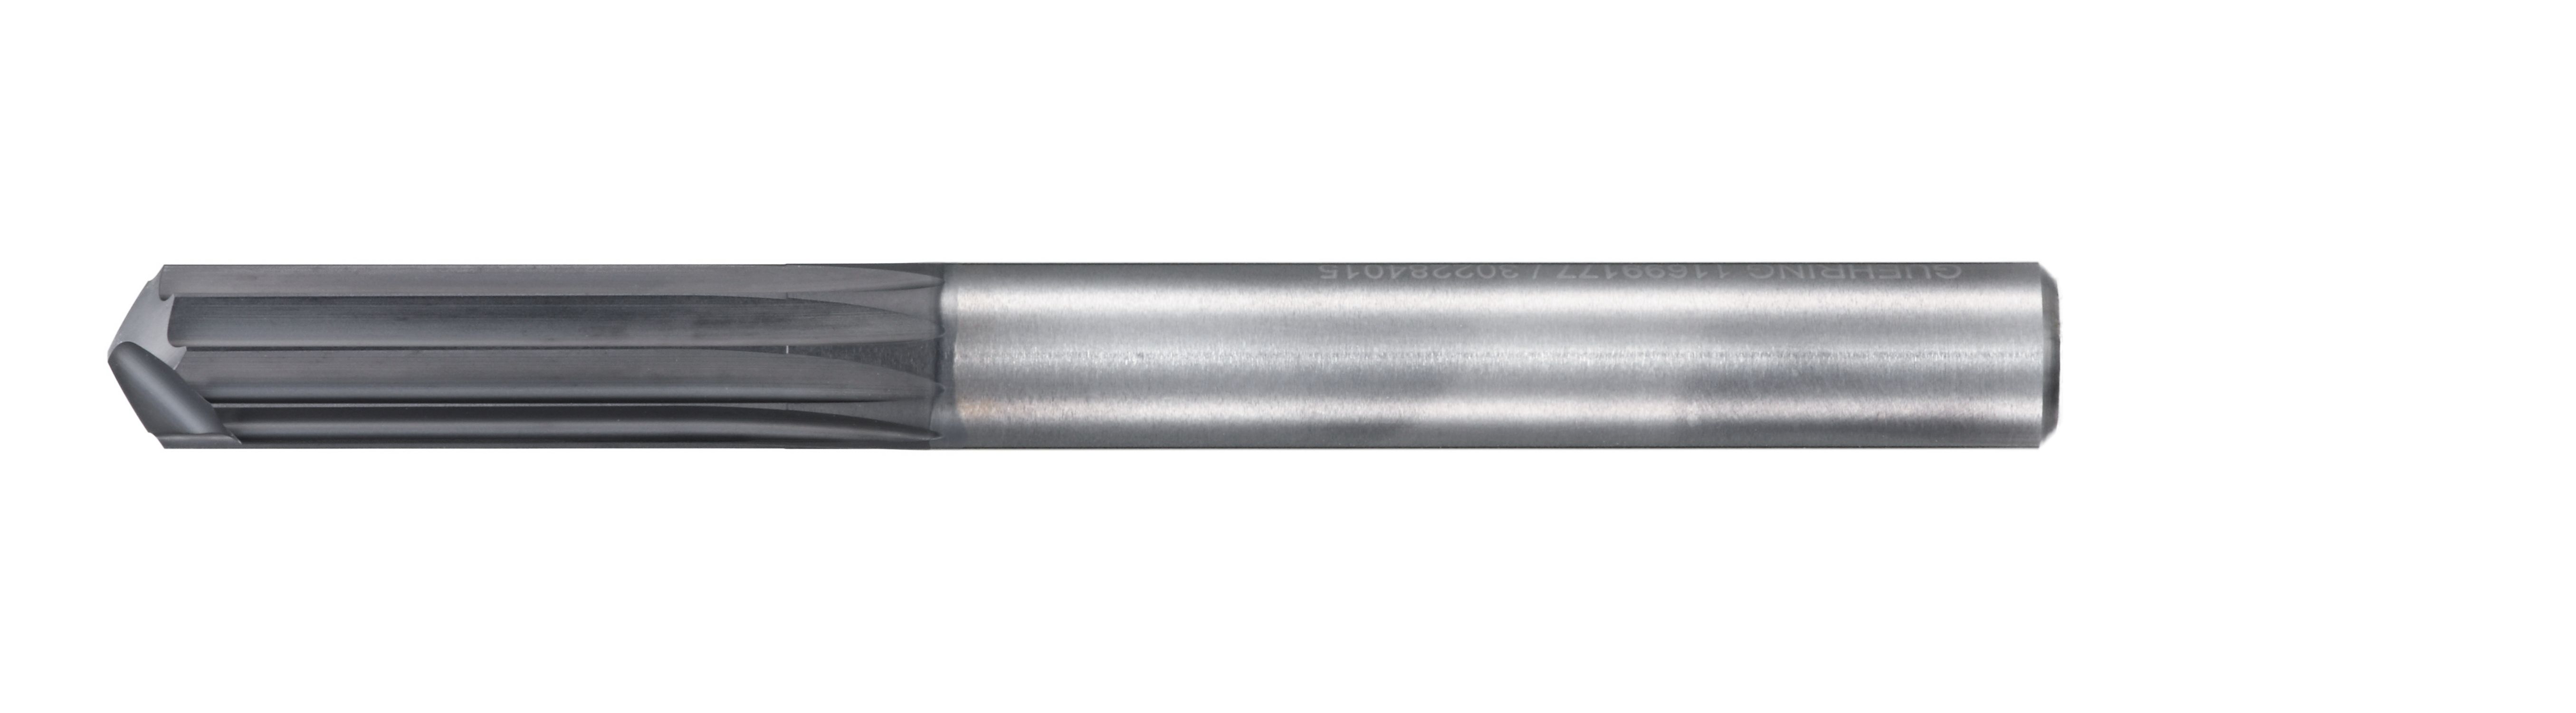 Grooving/Shouldering Multi-Flute End Mill for CFRP with Drill Point CR100 6720 6720-012.000